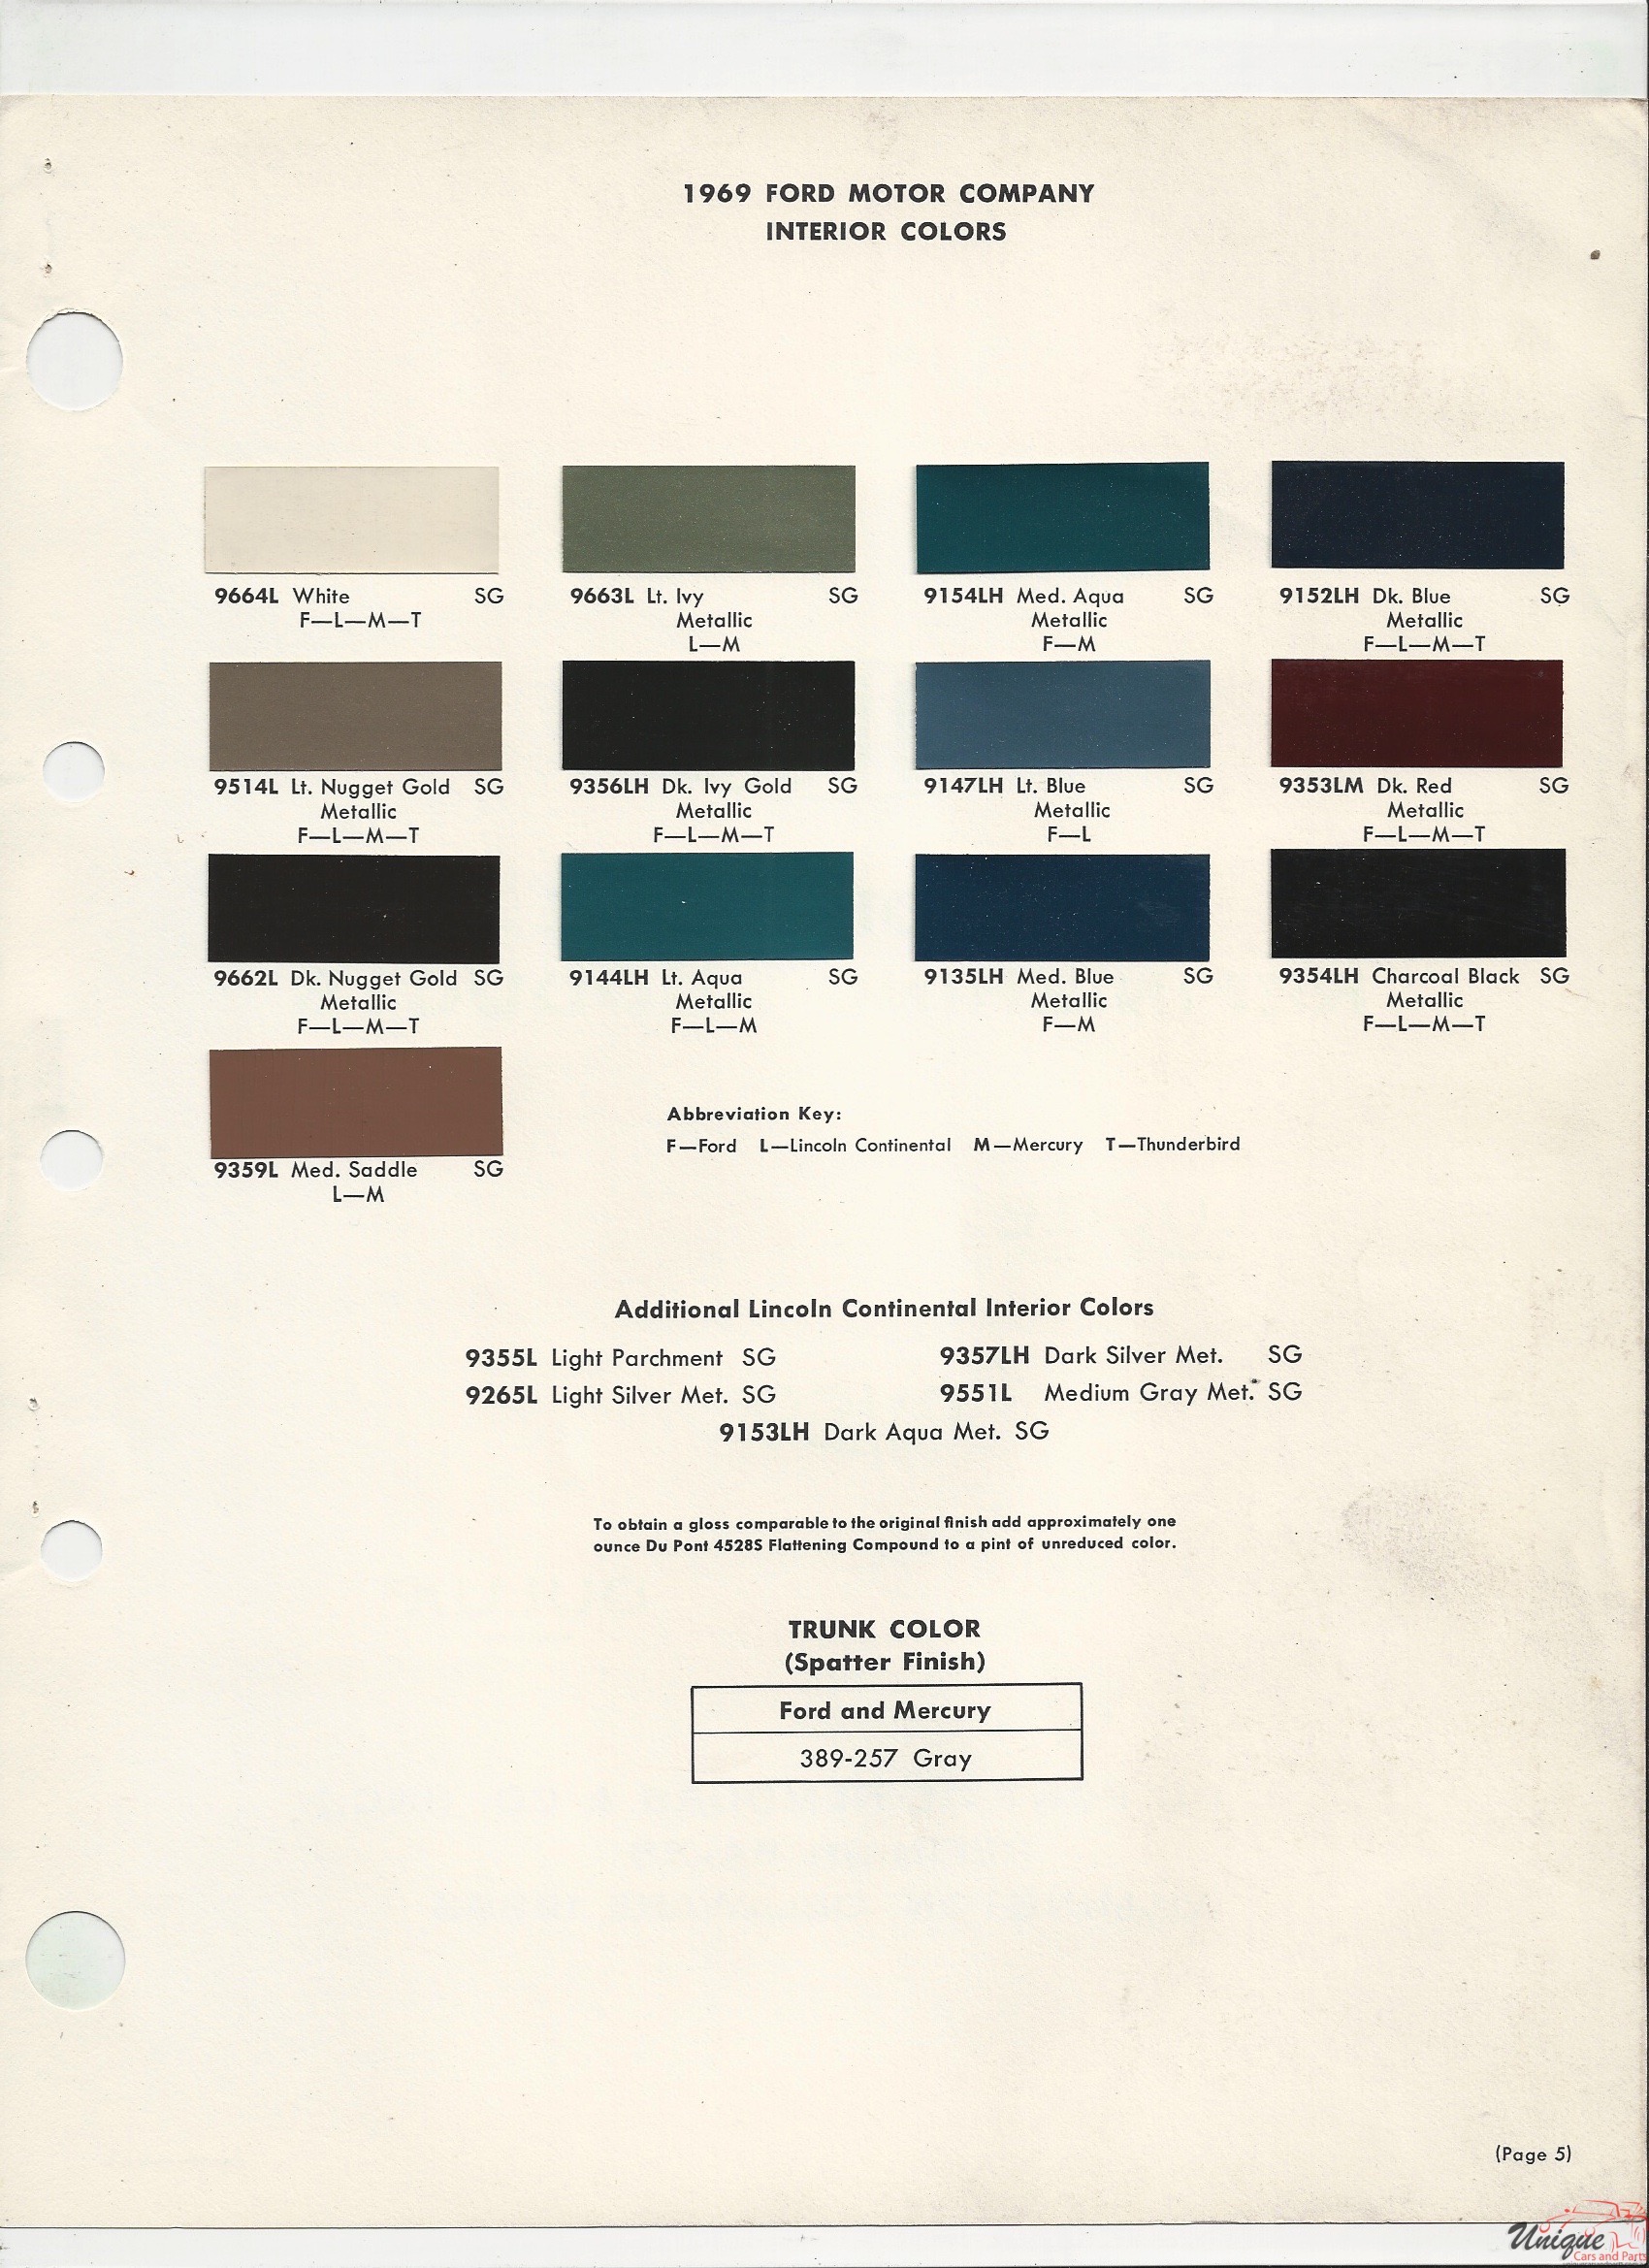 1969 Ford-5 Paint Charts